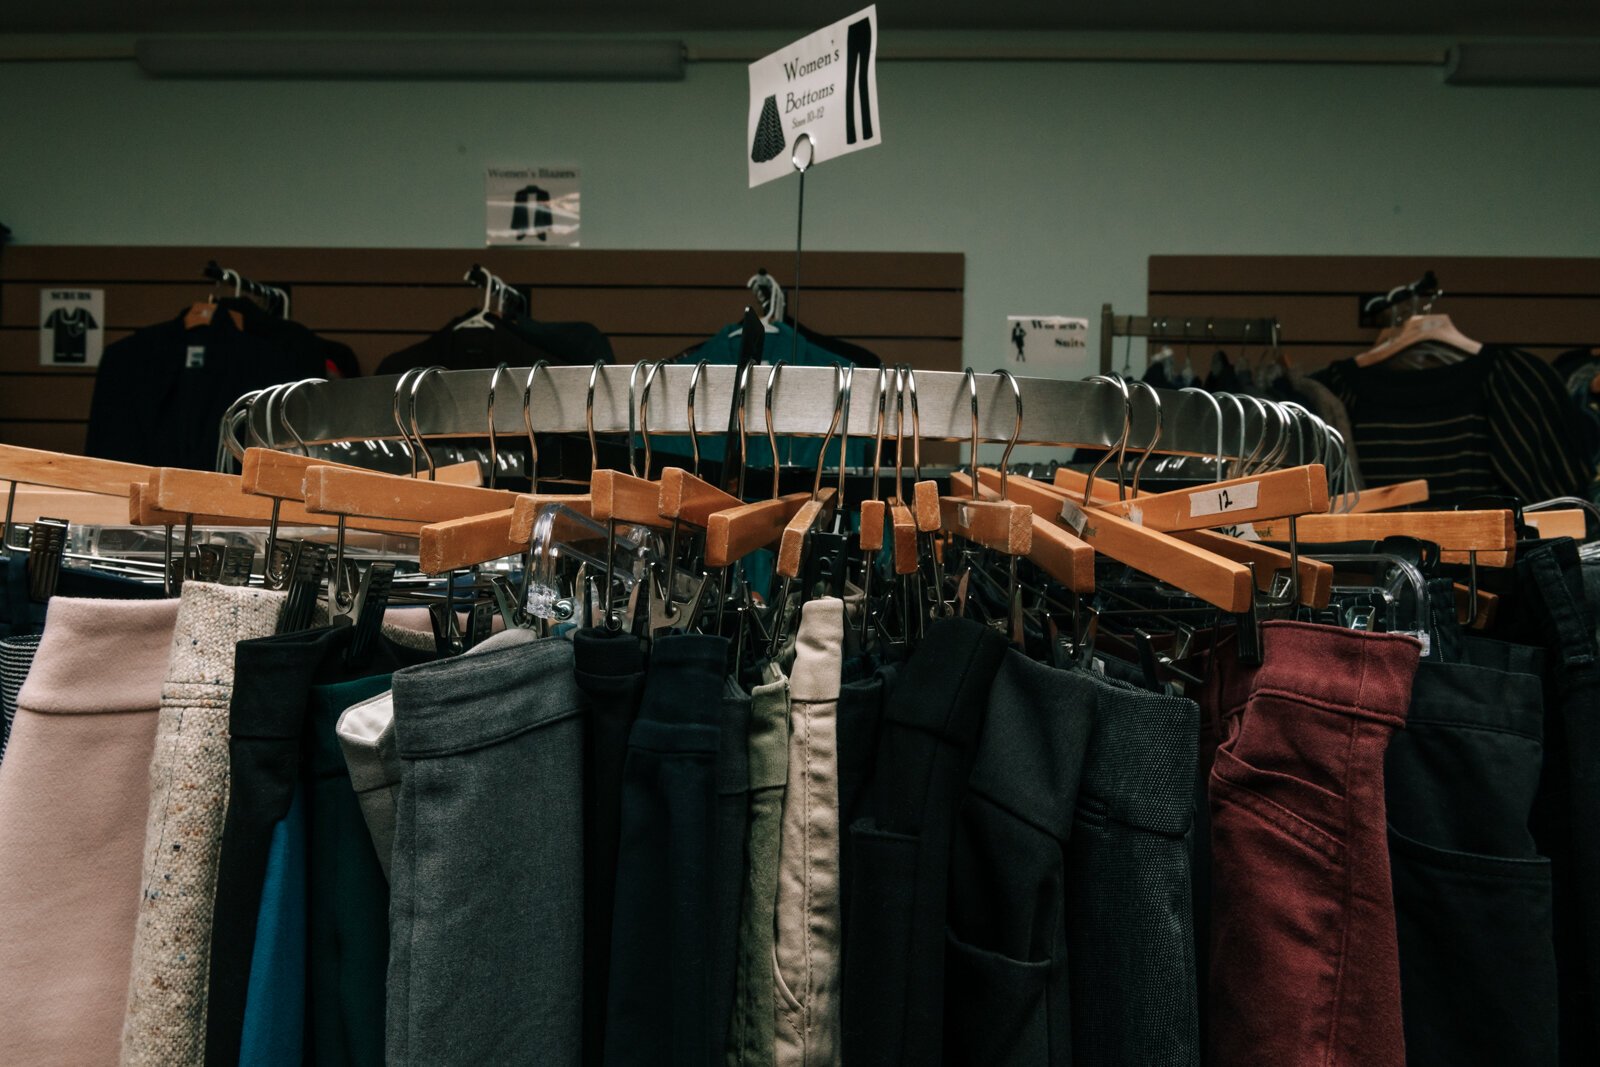 The Wellspring Shoppe's objective is to provide quality clothing to Allen County residents for everyday activities and also for job interviews, employment and social events.